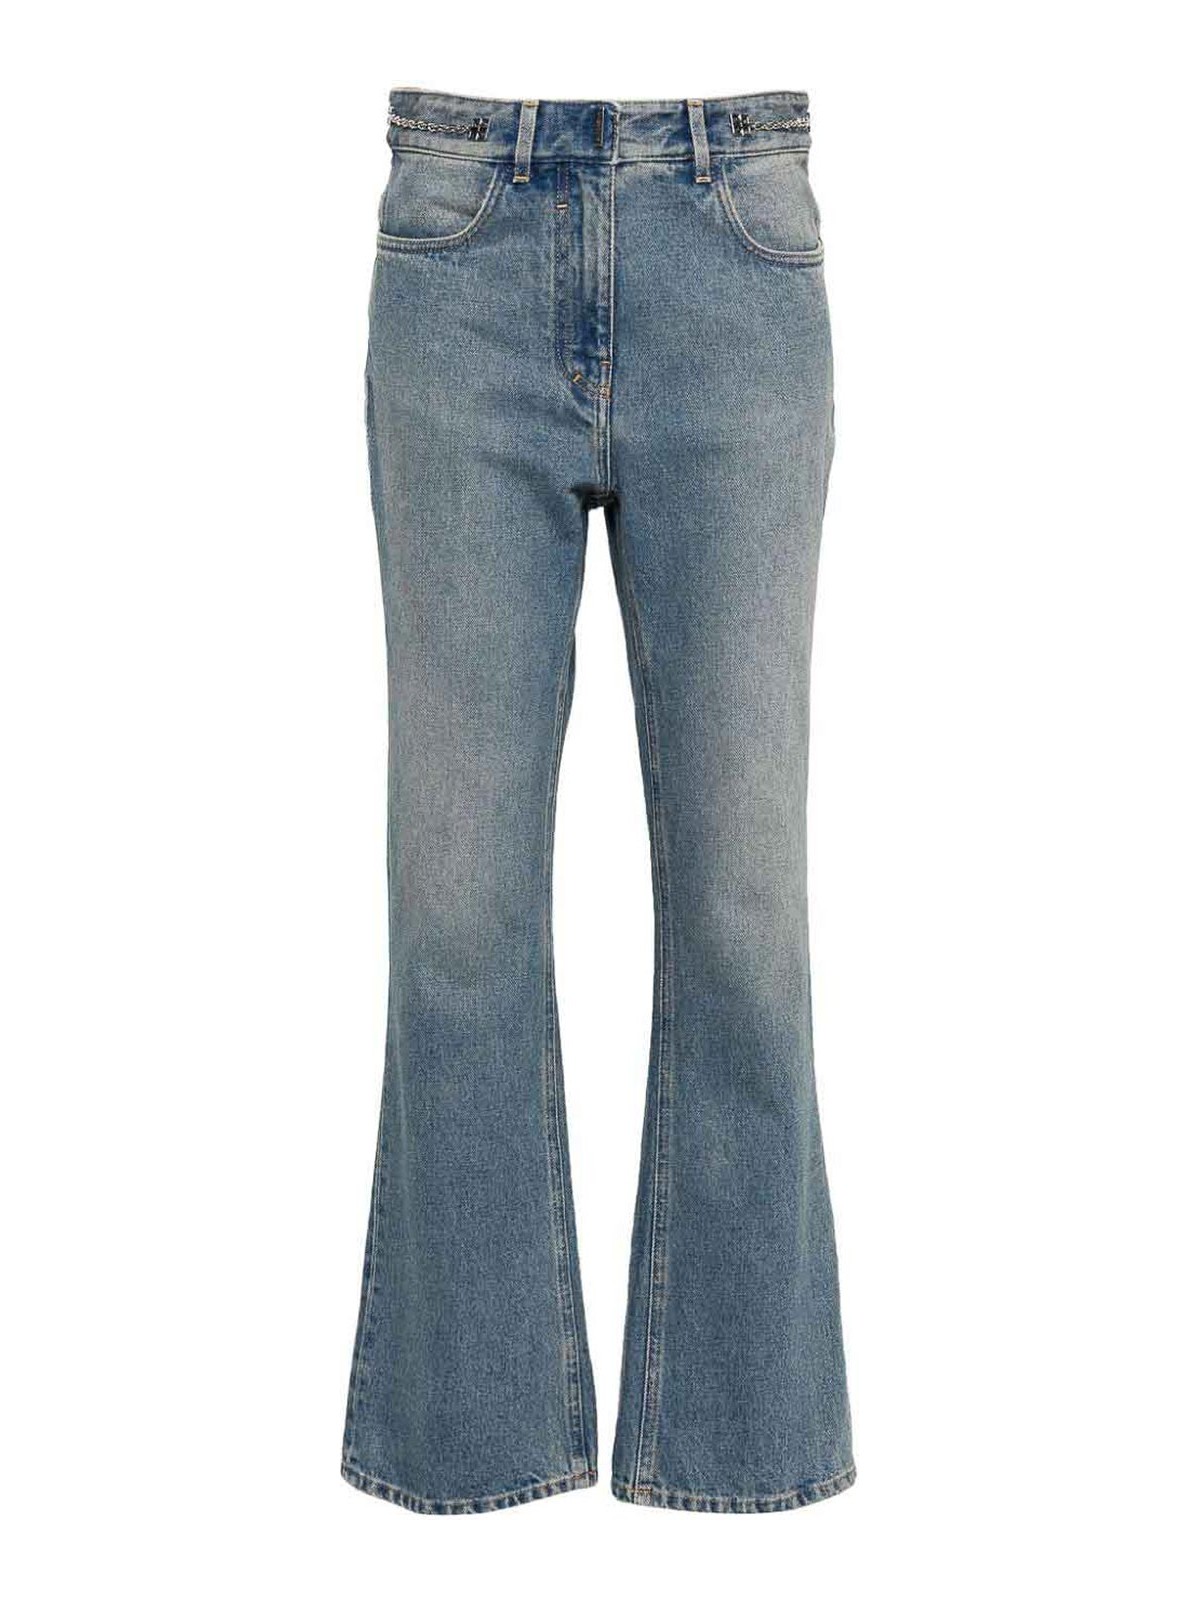 Givenchy Bootcut Jeans With Chain Details In Blue